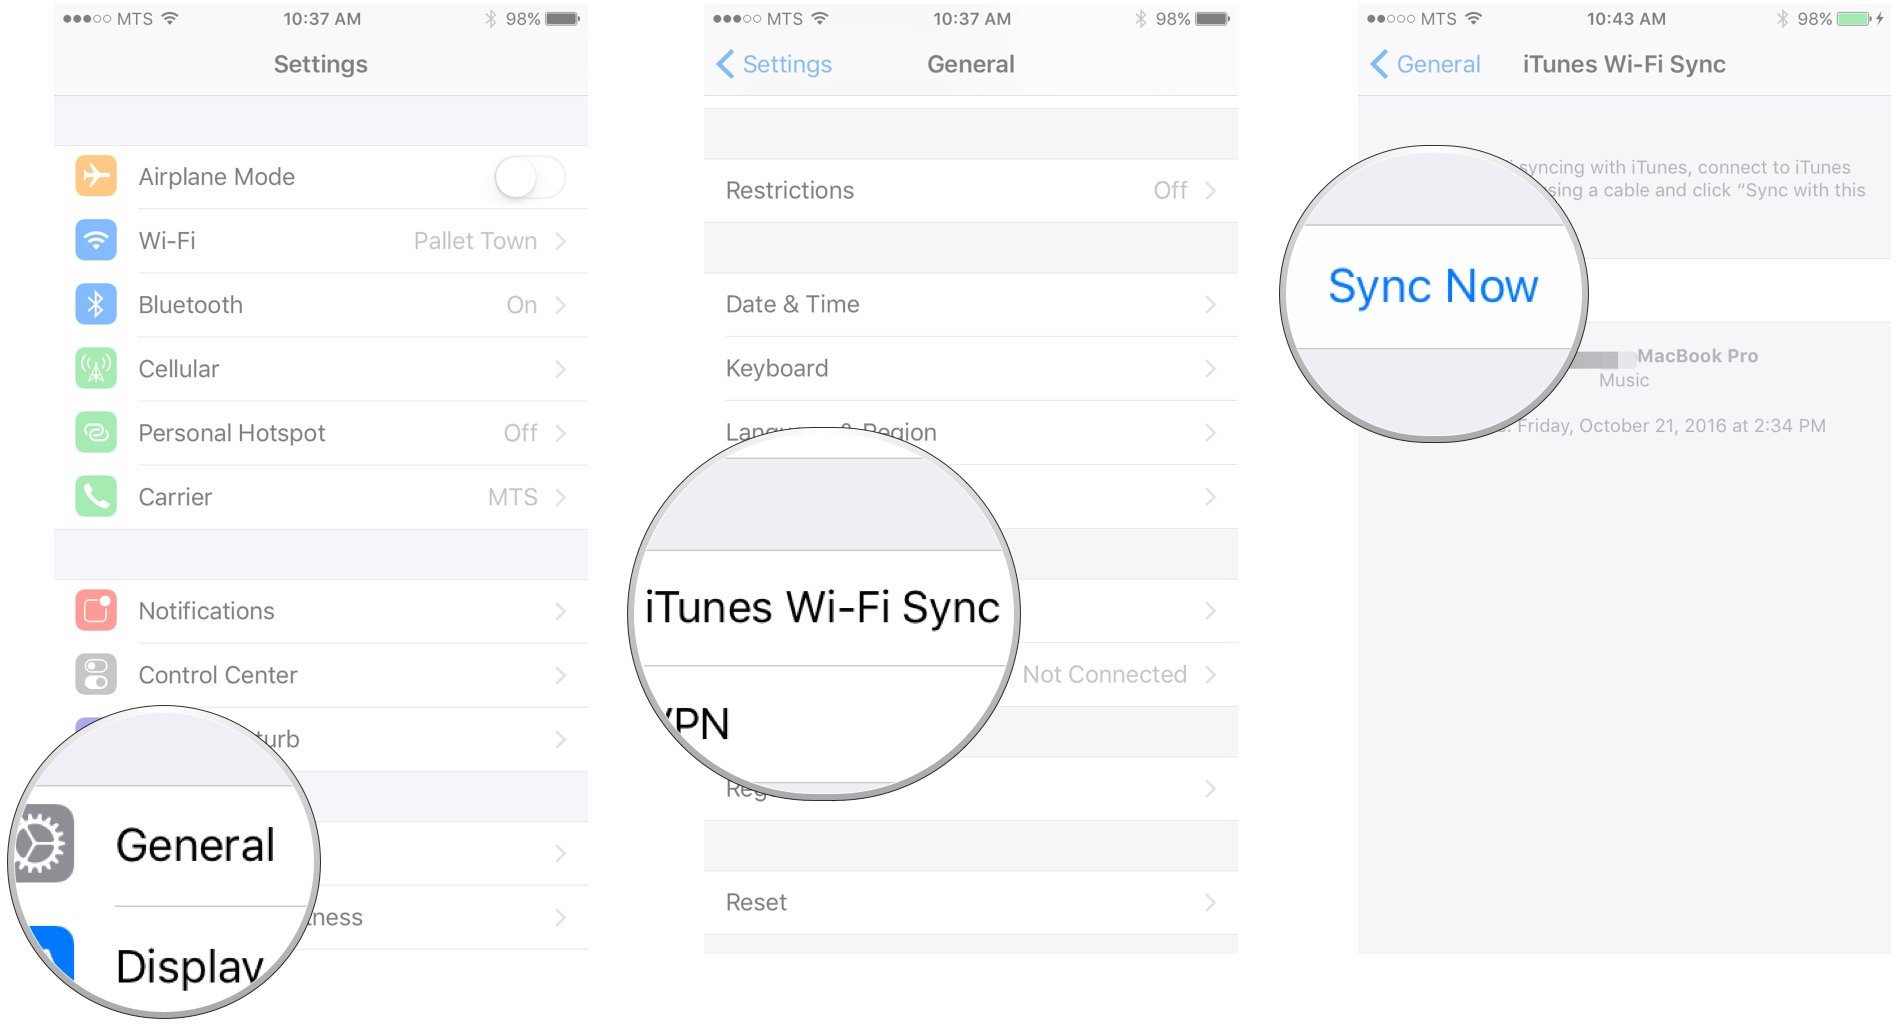 Tap General, iTunes Wi-Fi Sync, Sync Now